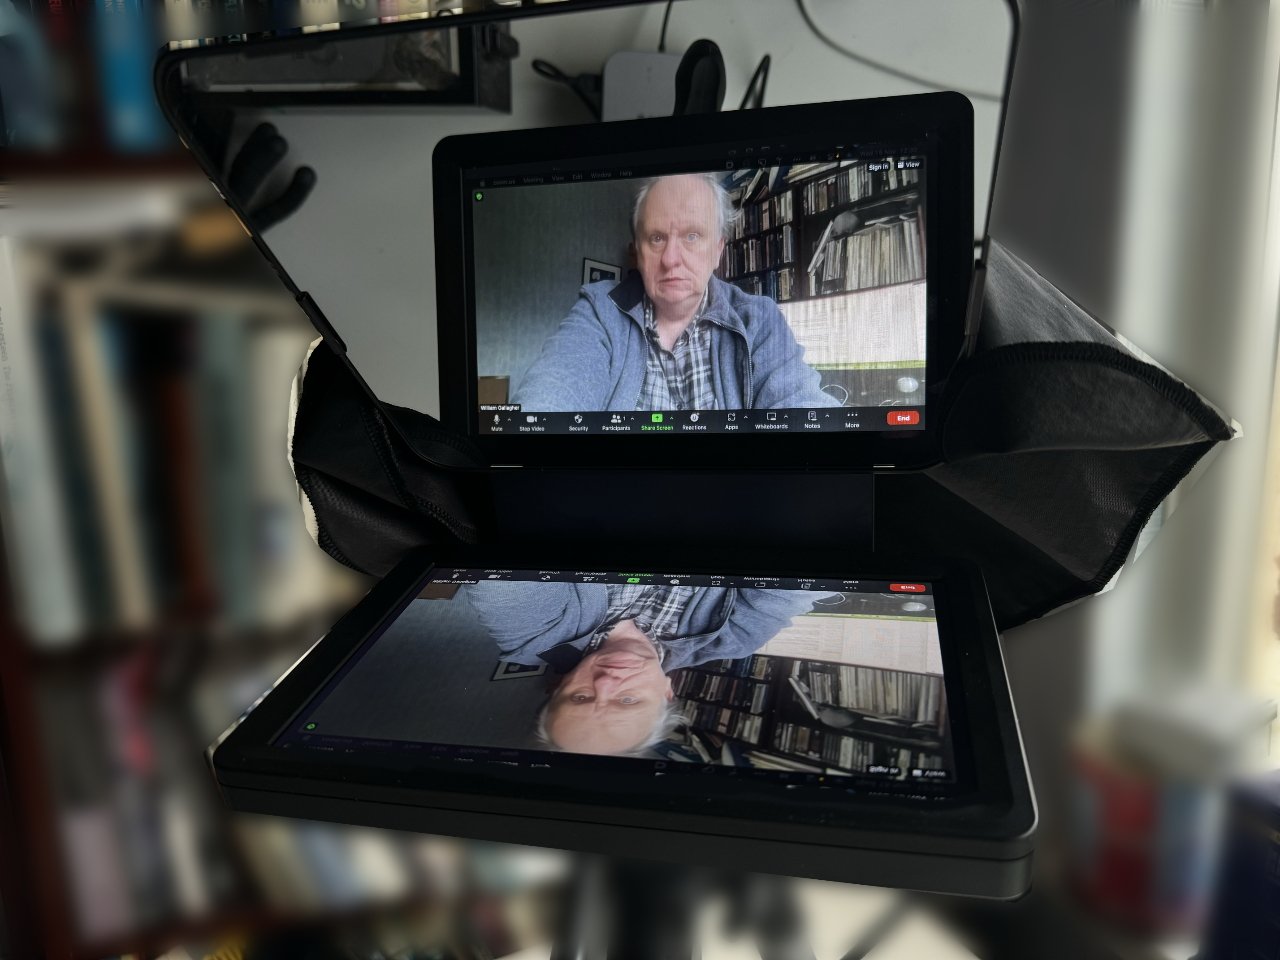 Prompter's display is also excellent for Zoom calls